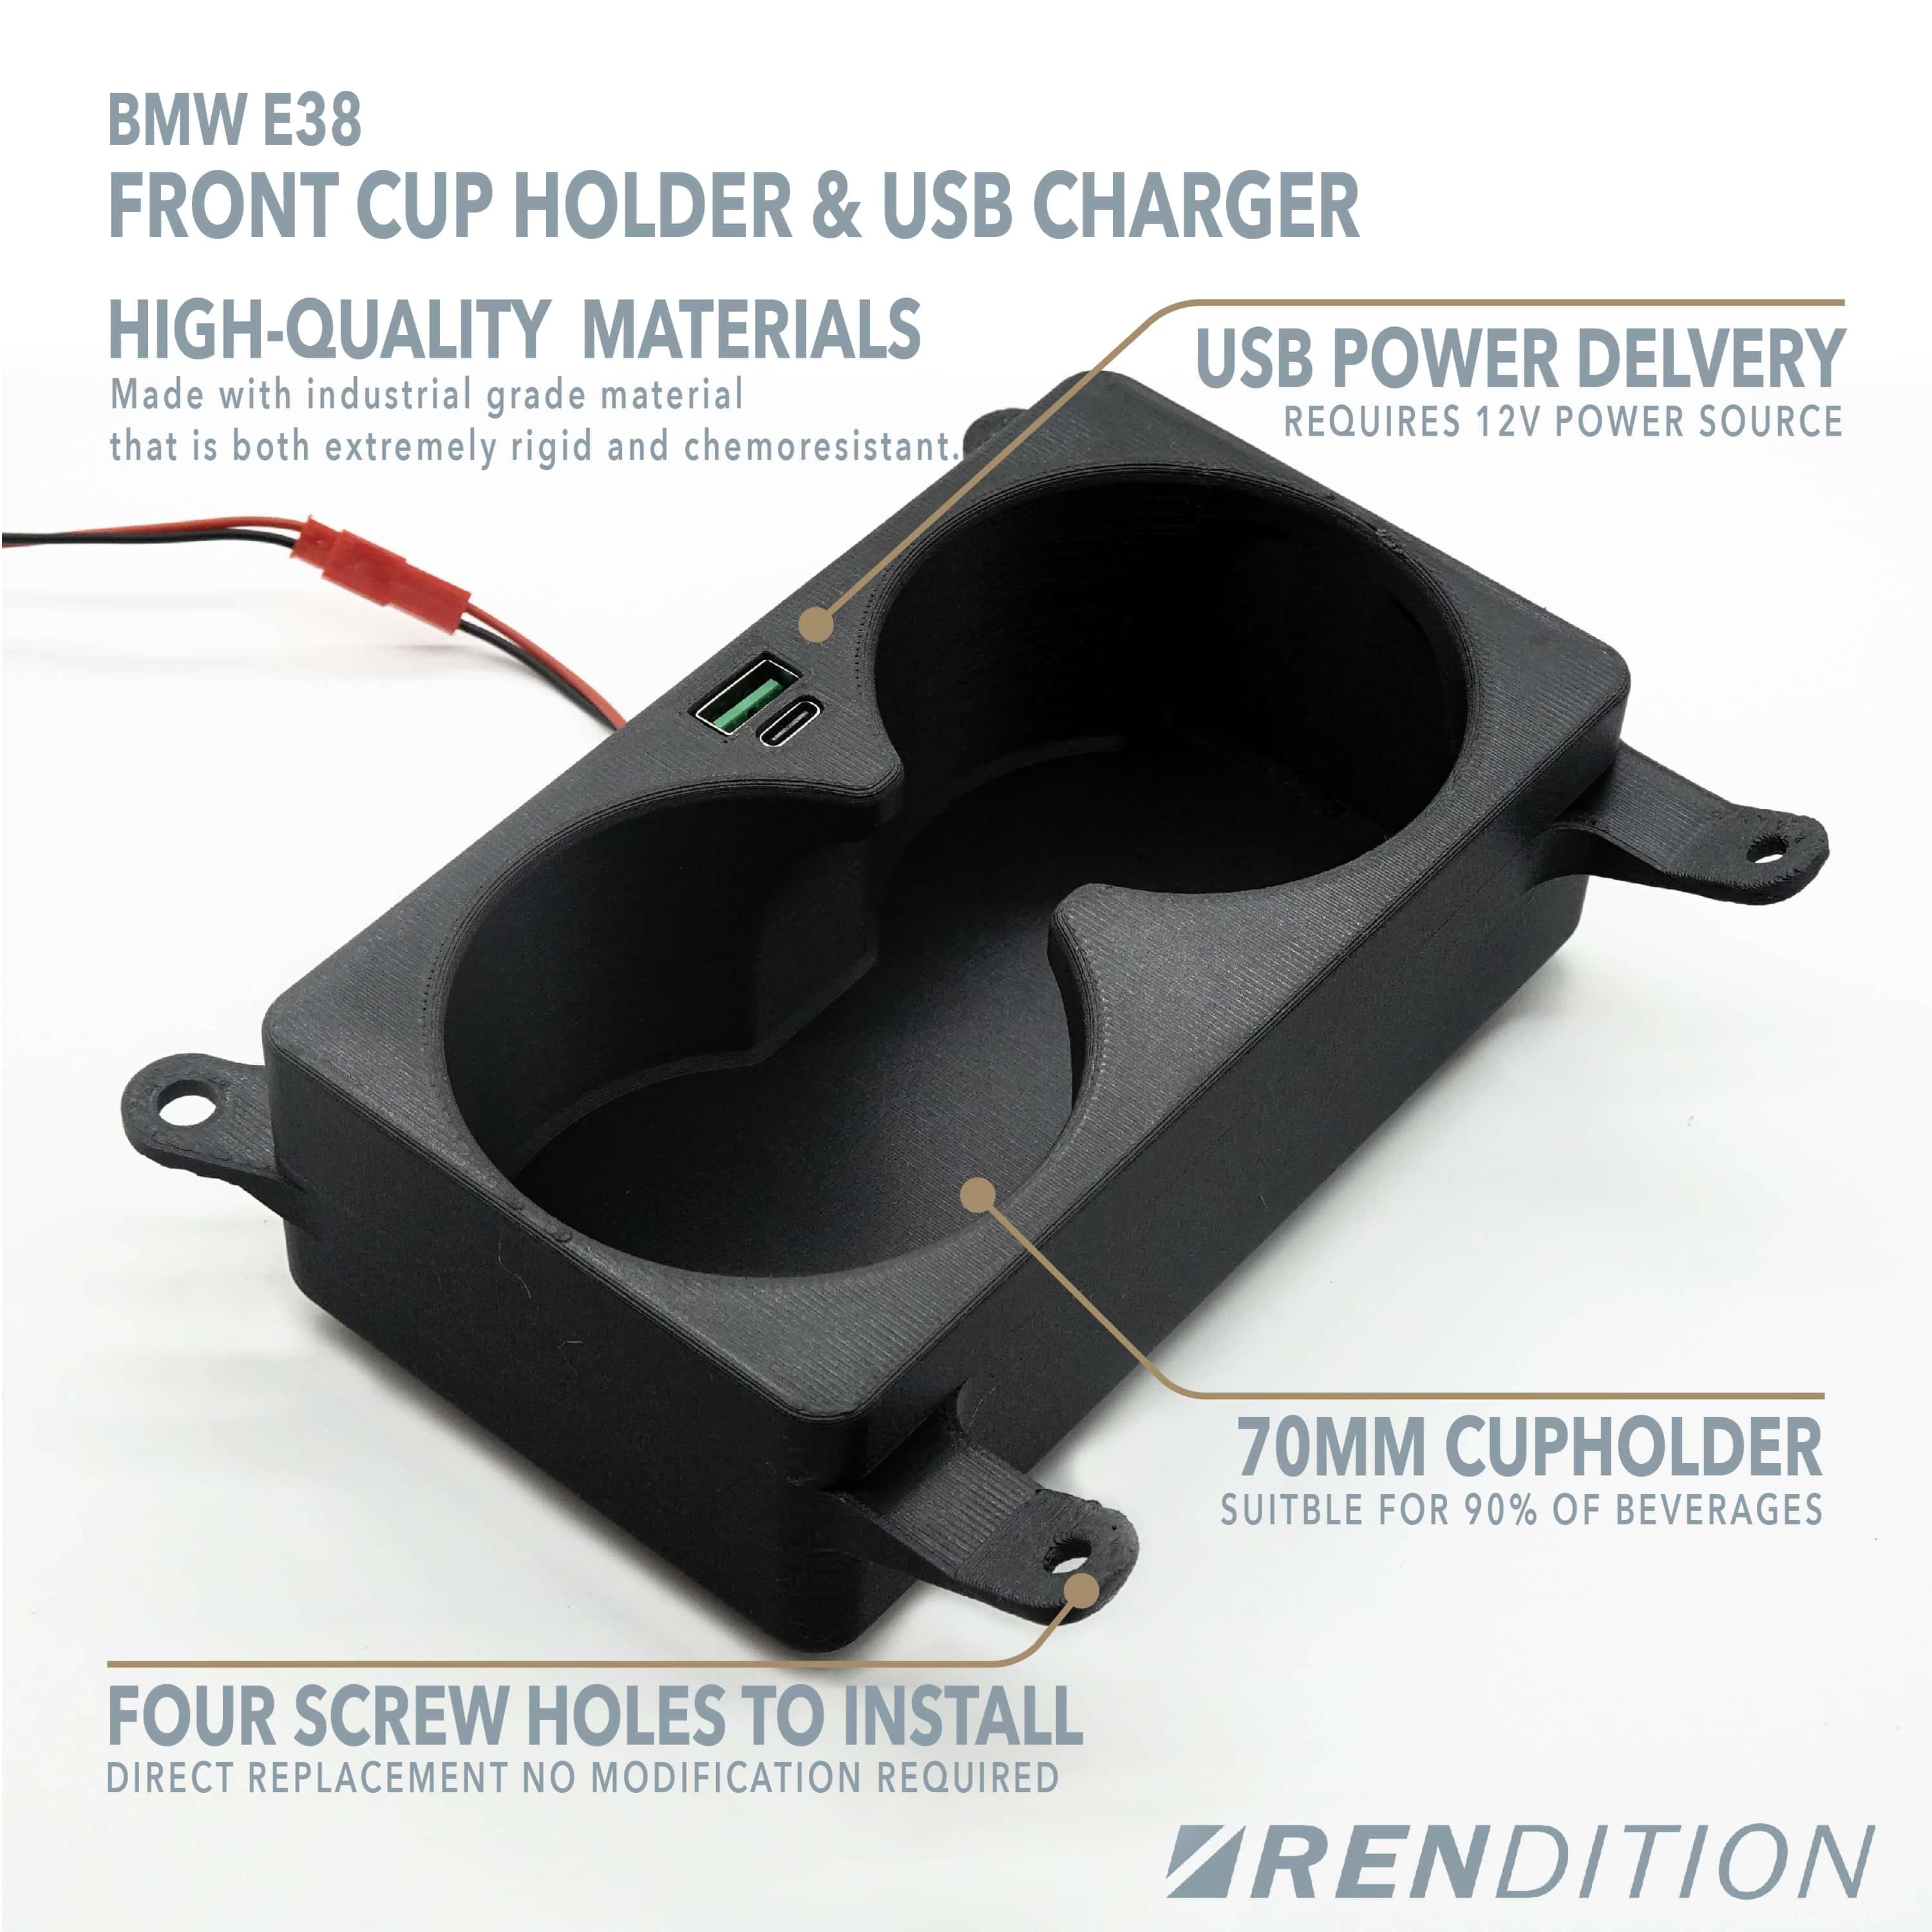 BMW E38 FRONT CUP HOLDER & USB CHARGER - K2 Industries